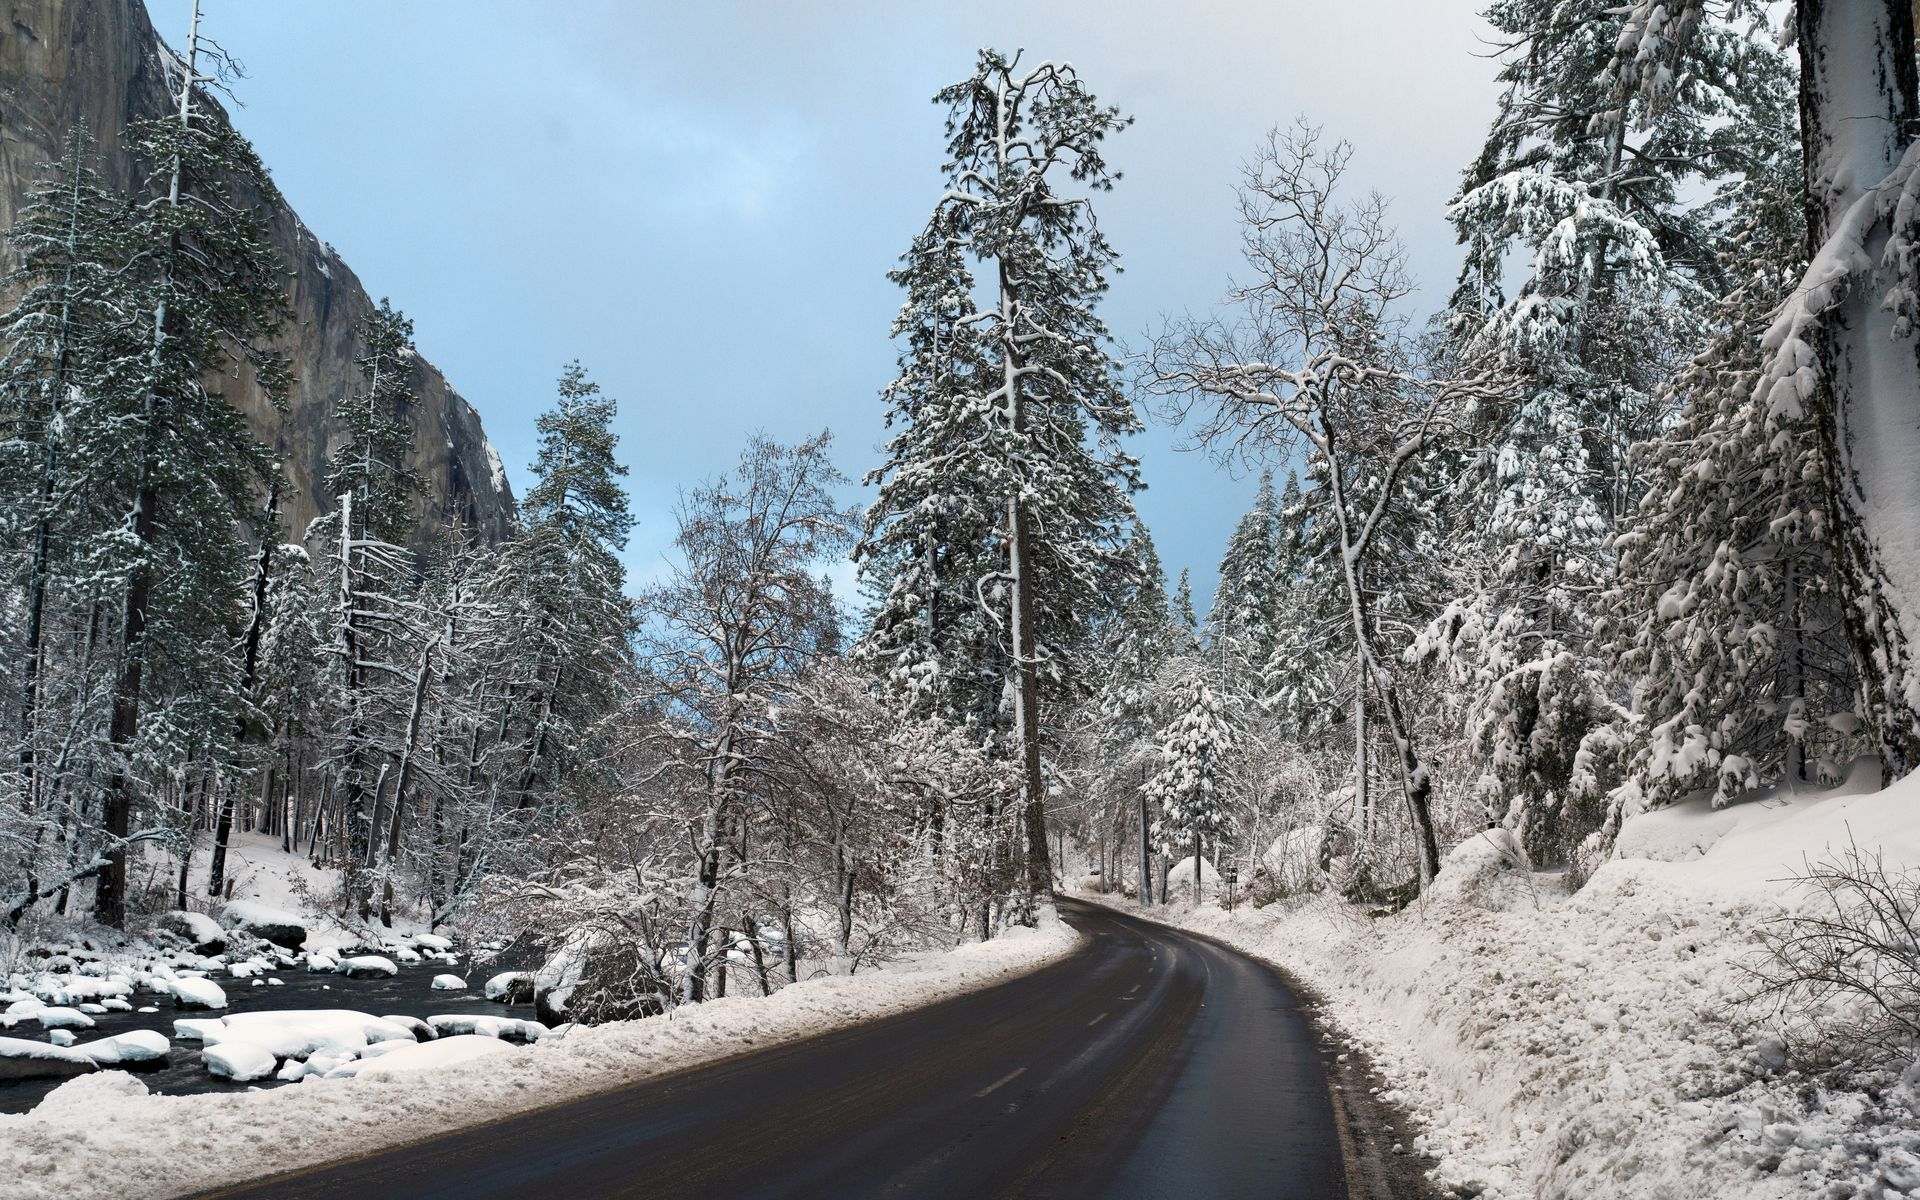 Download wallpaper 1920x1200 road, snow, winter, turn, valley, landscape widescreen 16:10 HD background